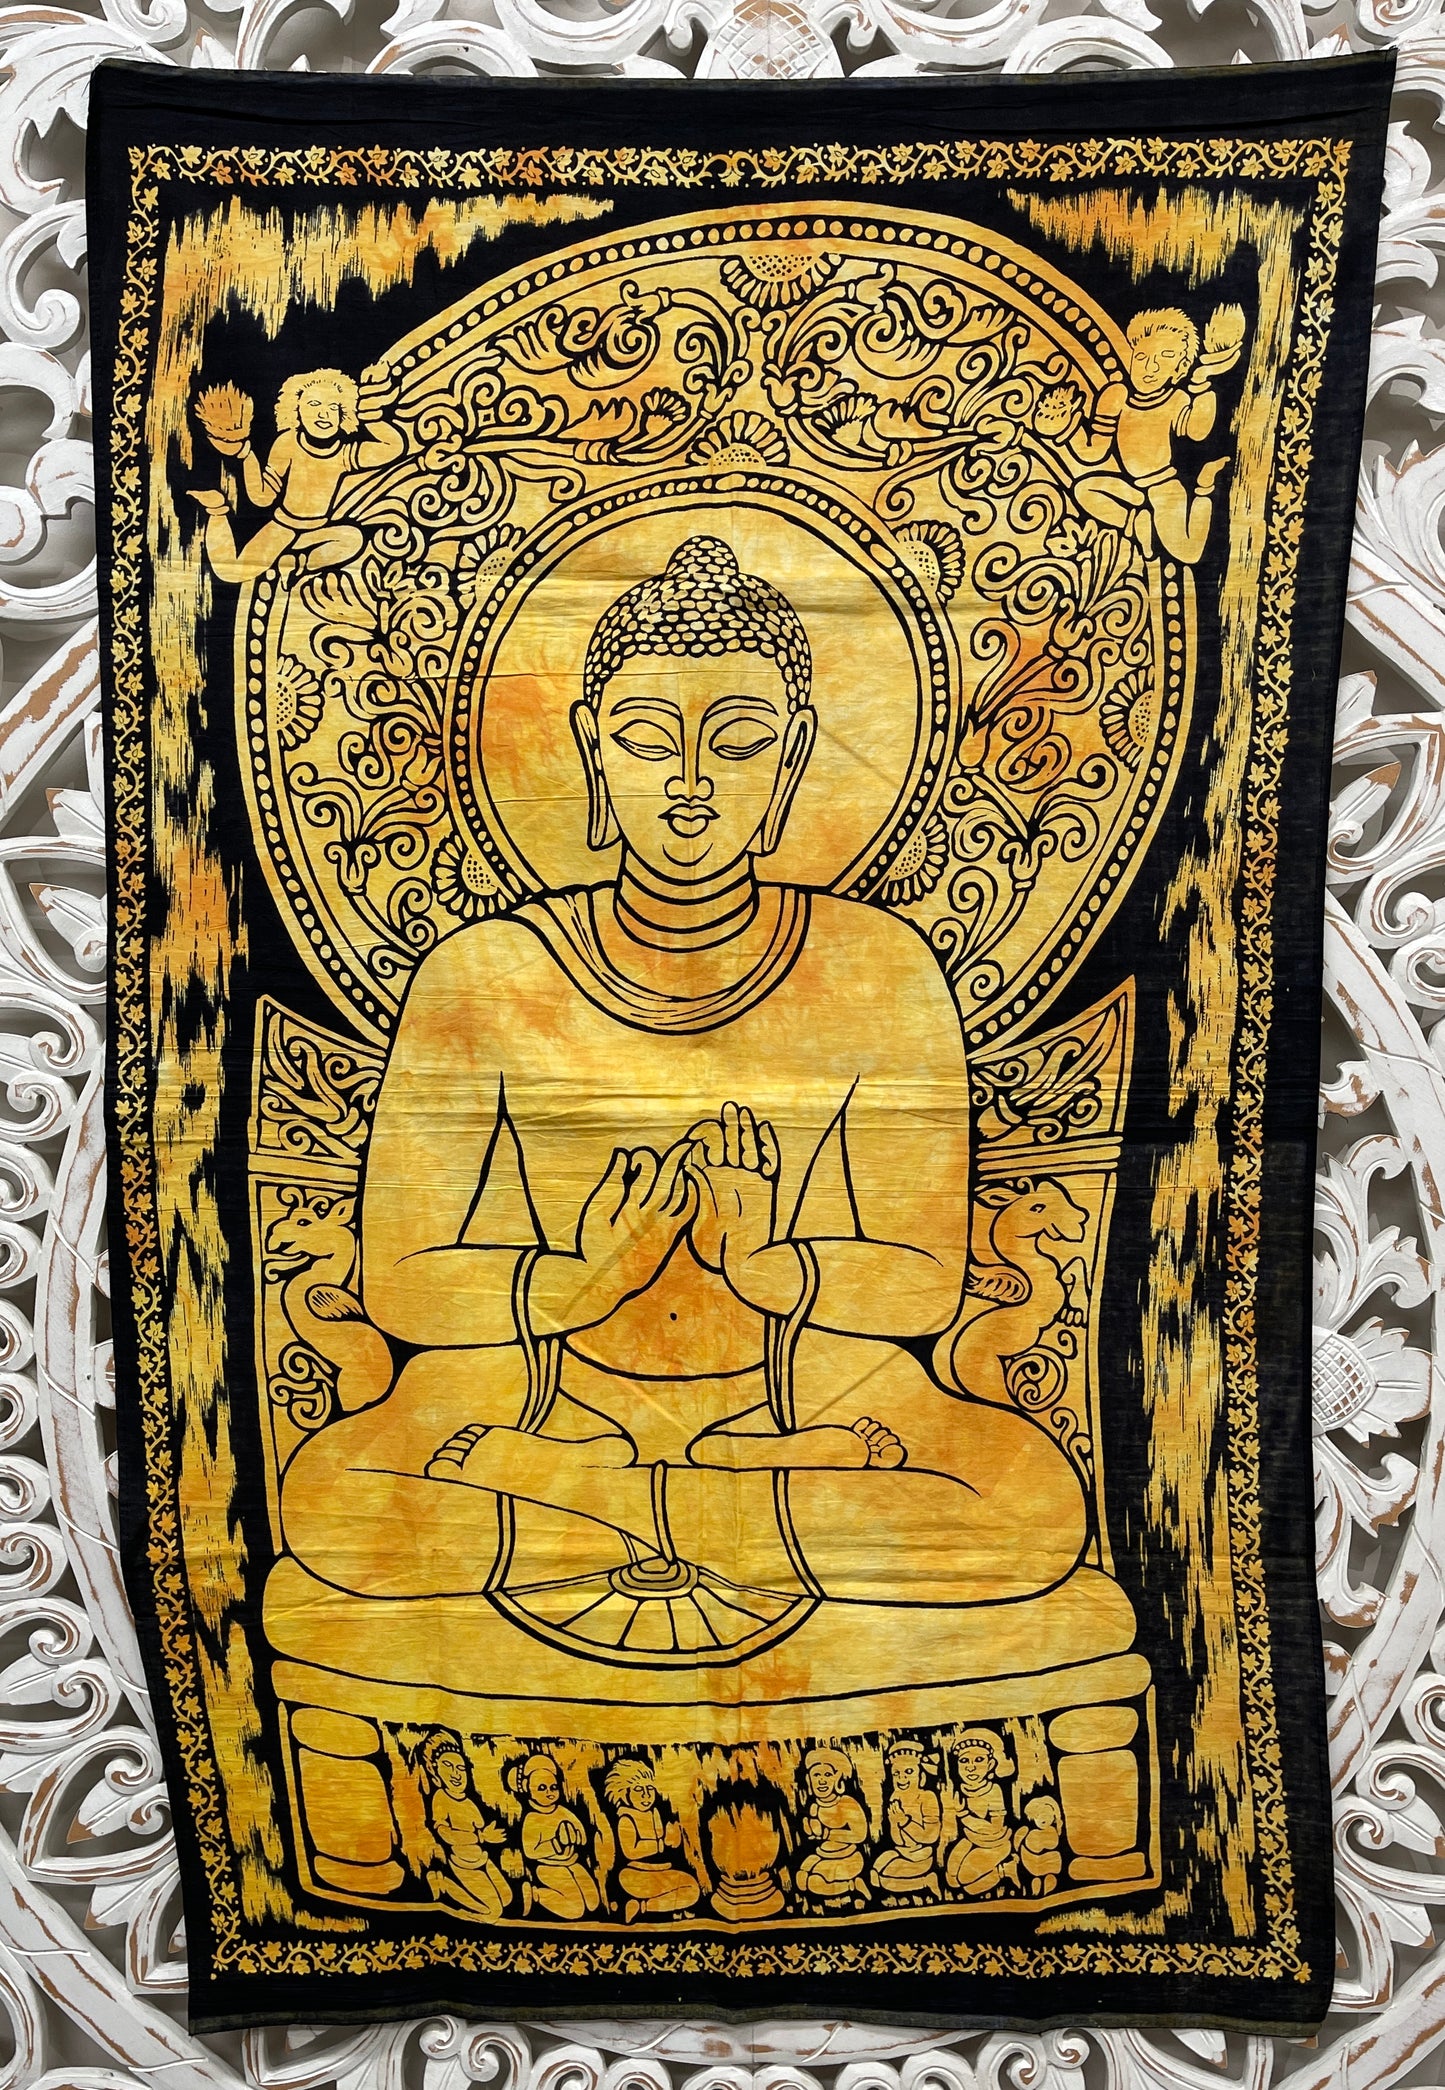 Hand printed Fabric Posters Mini Buddha Tapestry Wall Hanging - Available in 5 Colors